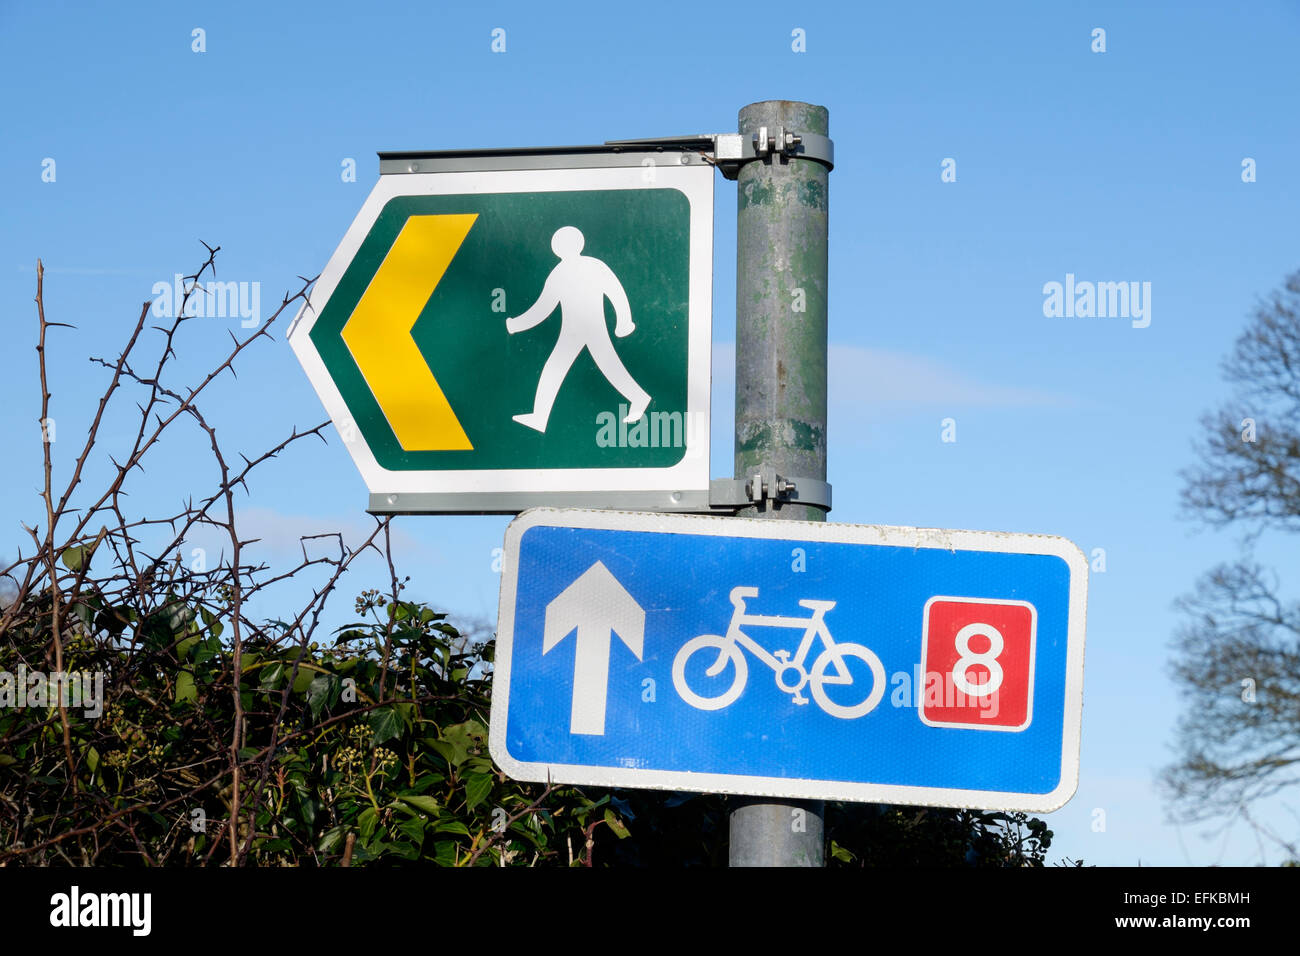 Public footpath sign and cycle route 8 sign on a roadside signpost in a hedge. Llanfair PG, Isle of Anglesey, Wales, UK, Britain Stock Photo